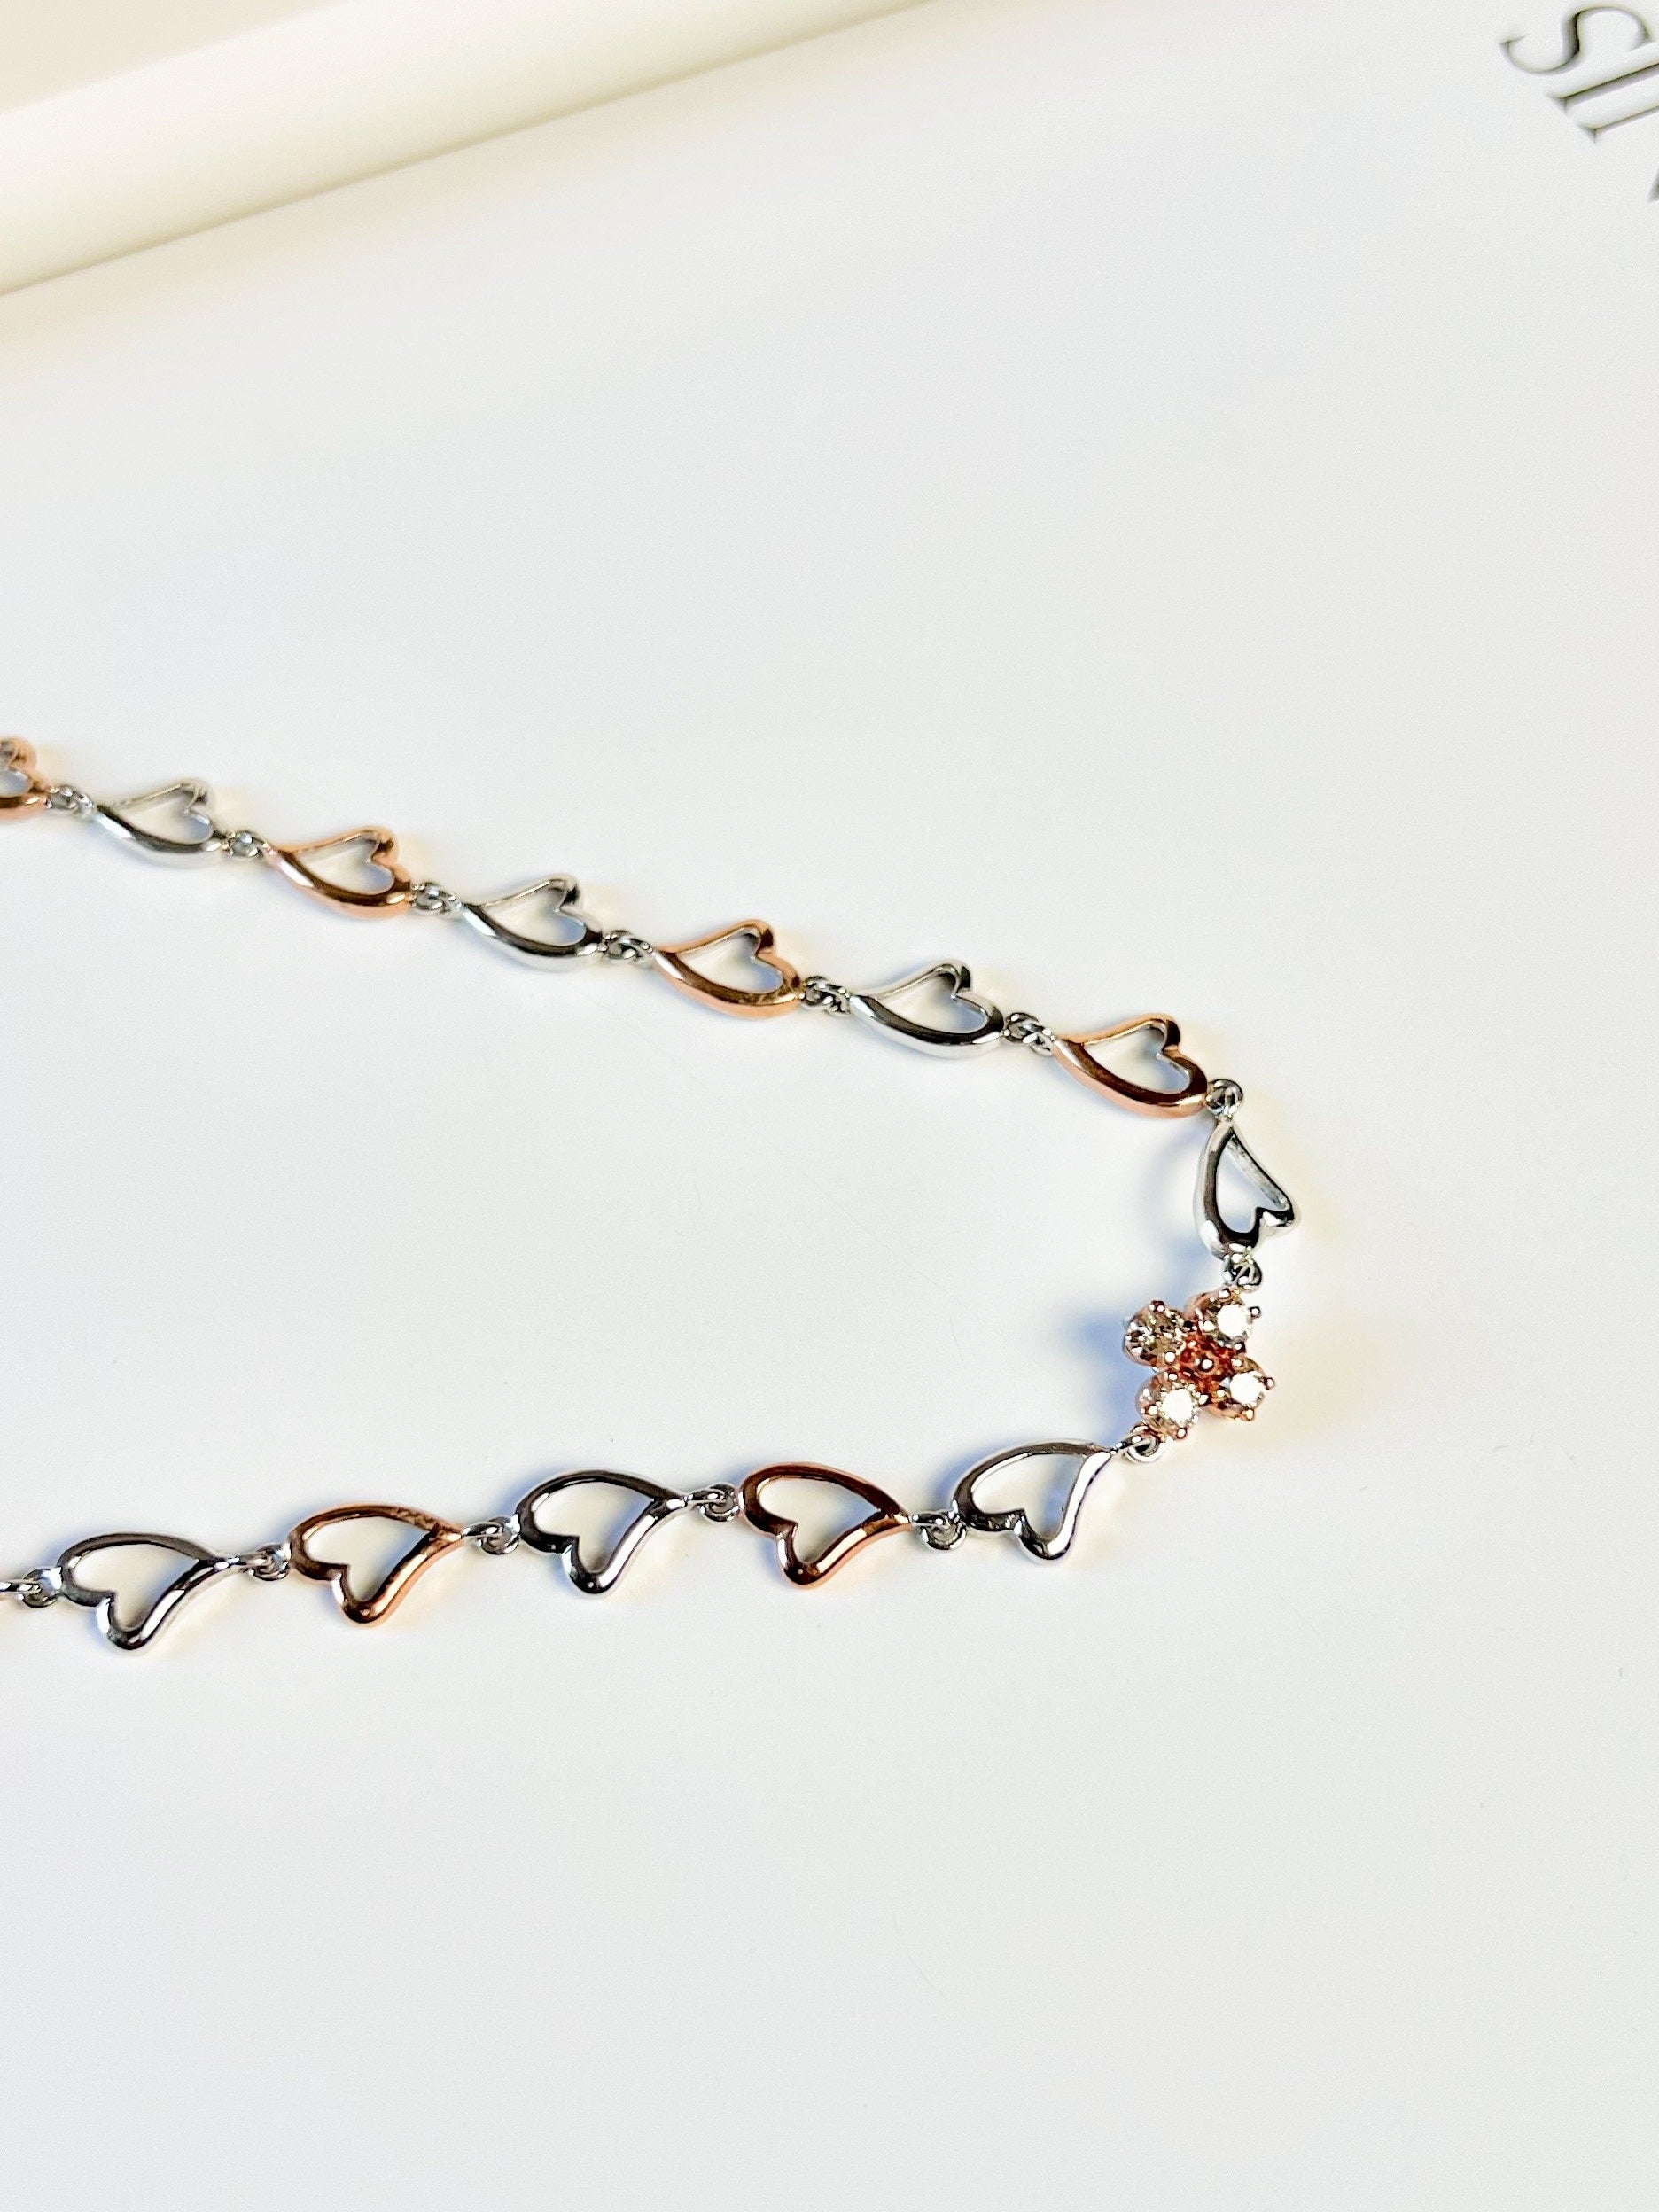 Real Natural Champagne Diamonds Heart Chain Necklace with Certificate